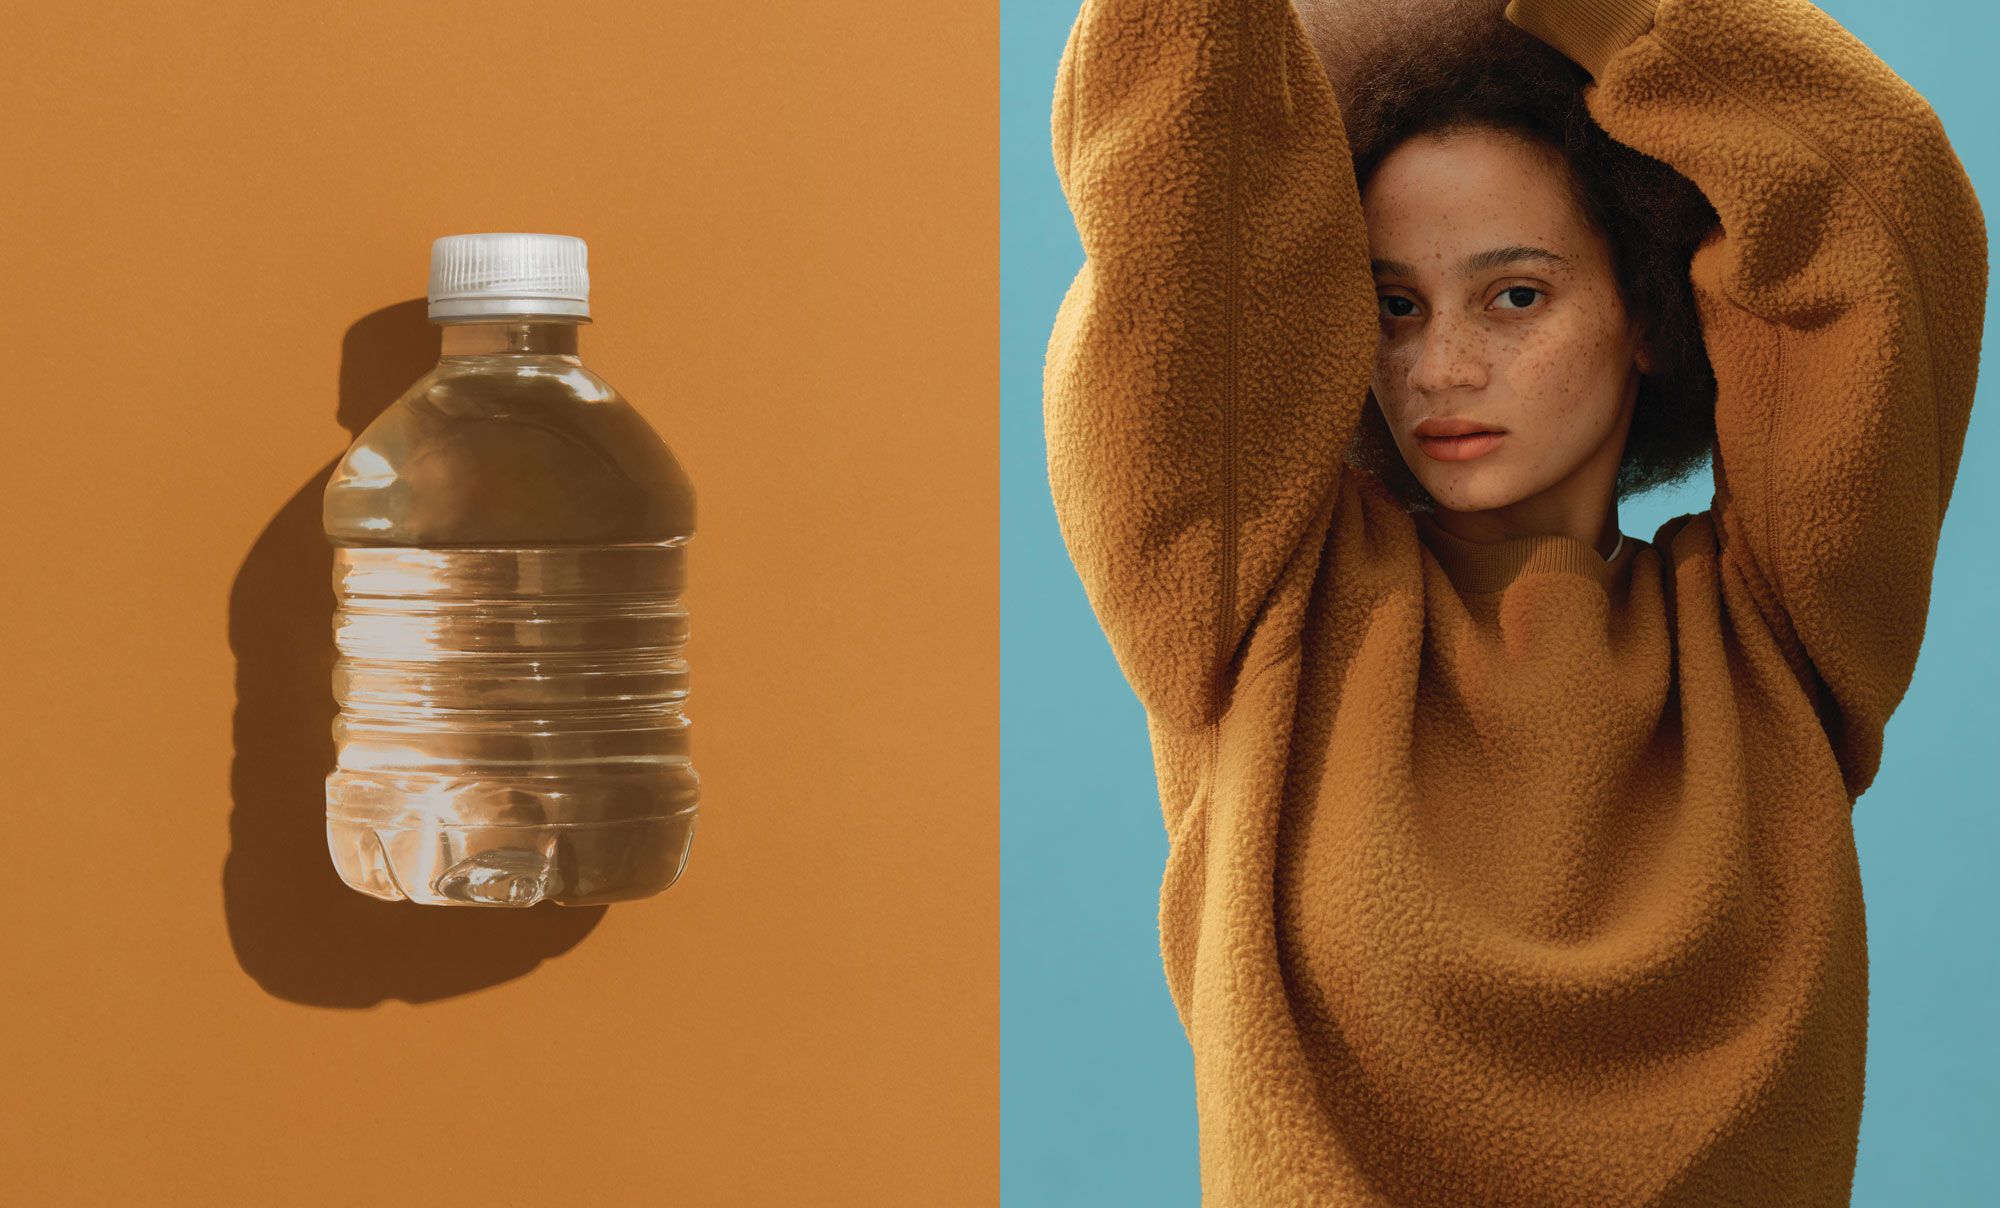 Girlfriend Collective: How do we turn water bottles into your